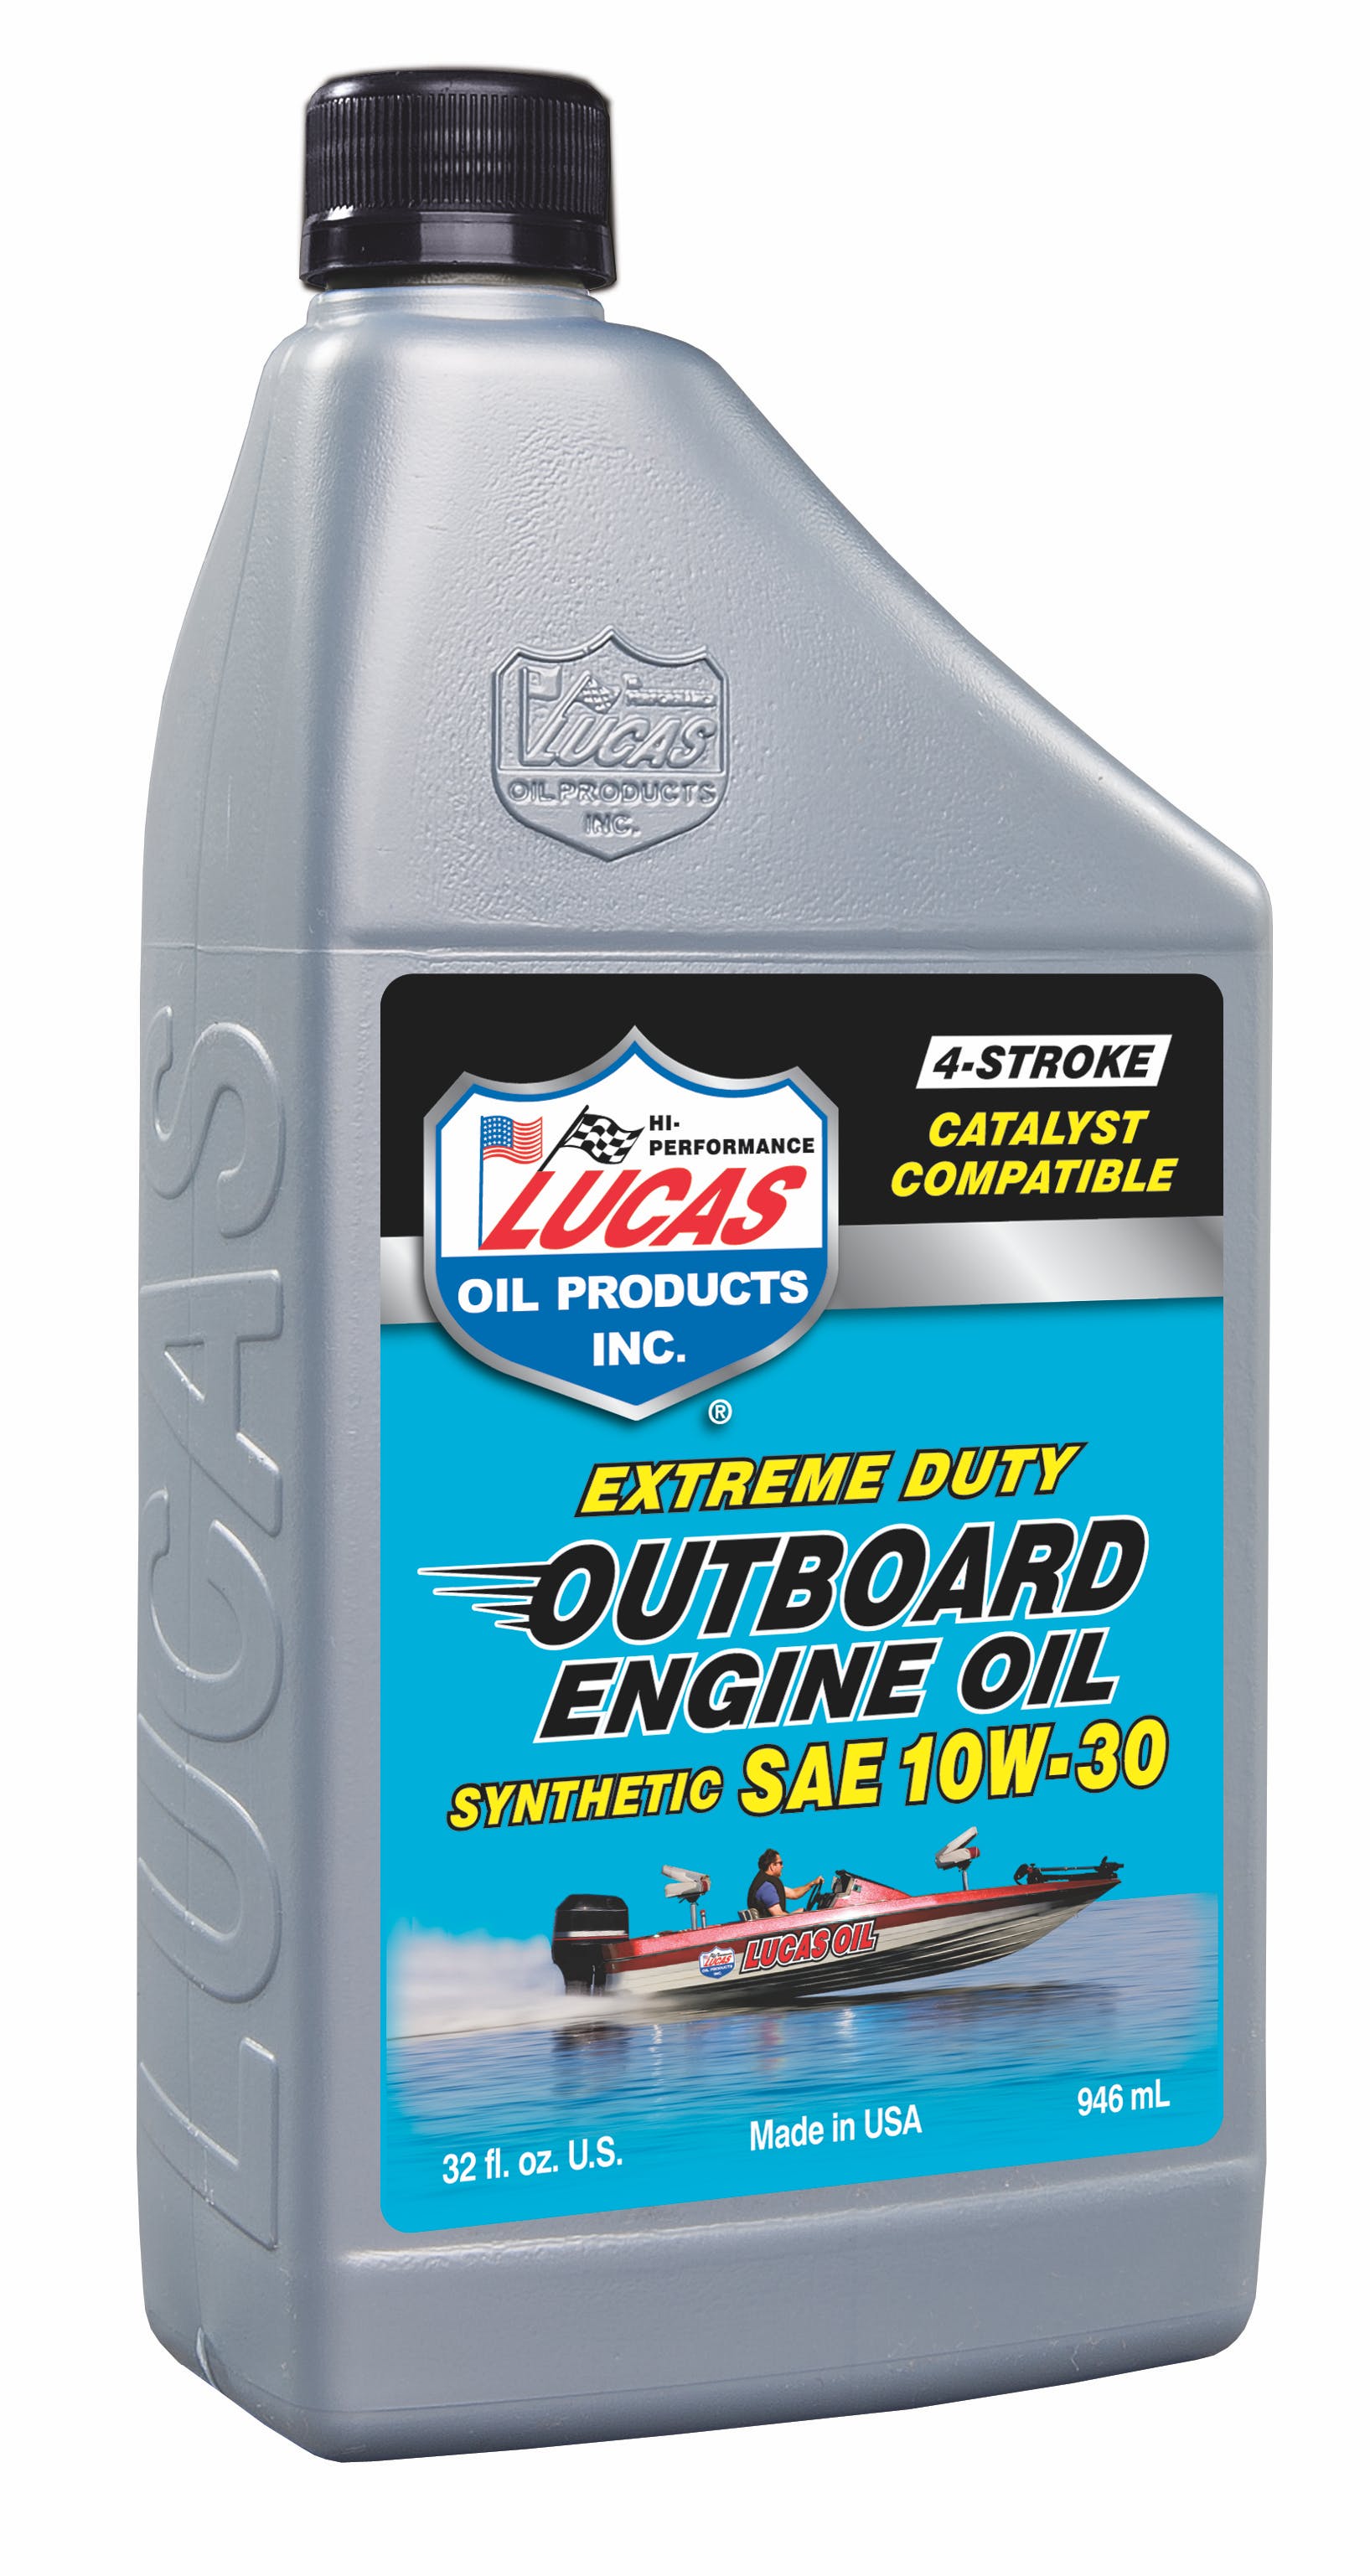 Lucas OIL Outboard Engine Oil Synthetic 10W-30 (1 QT) 20661